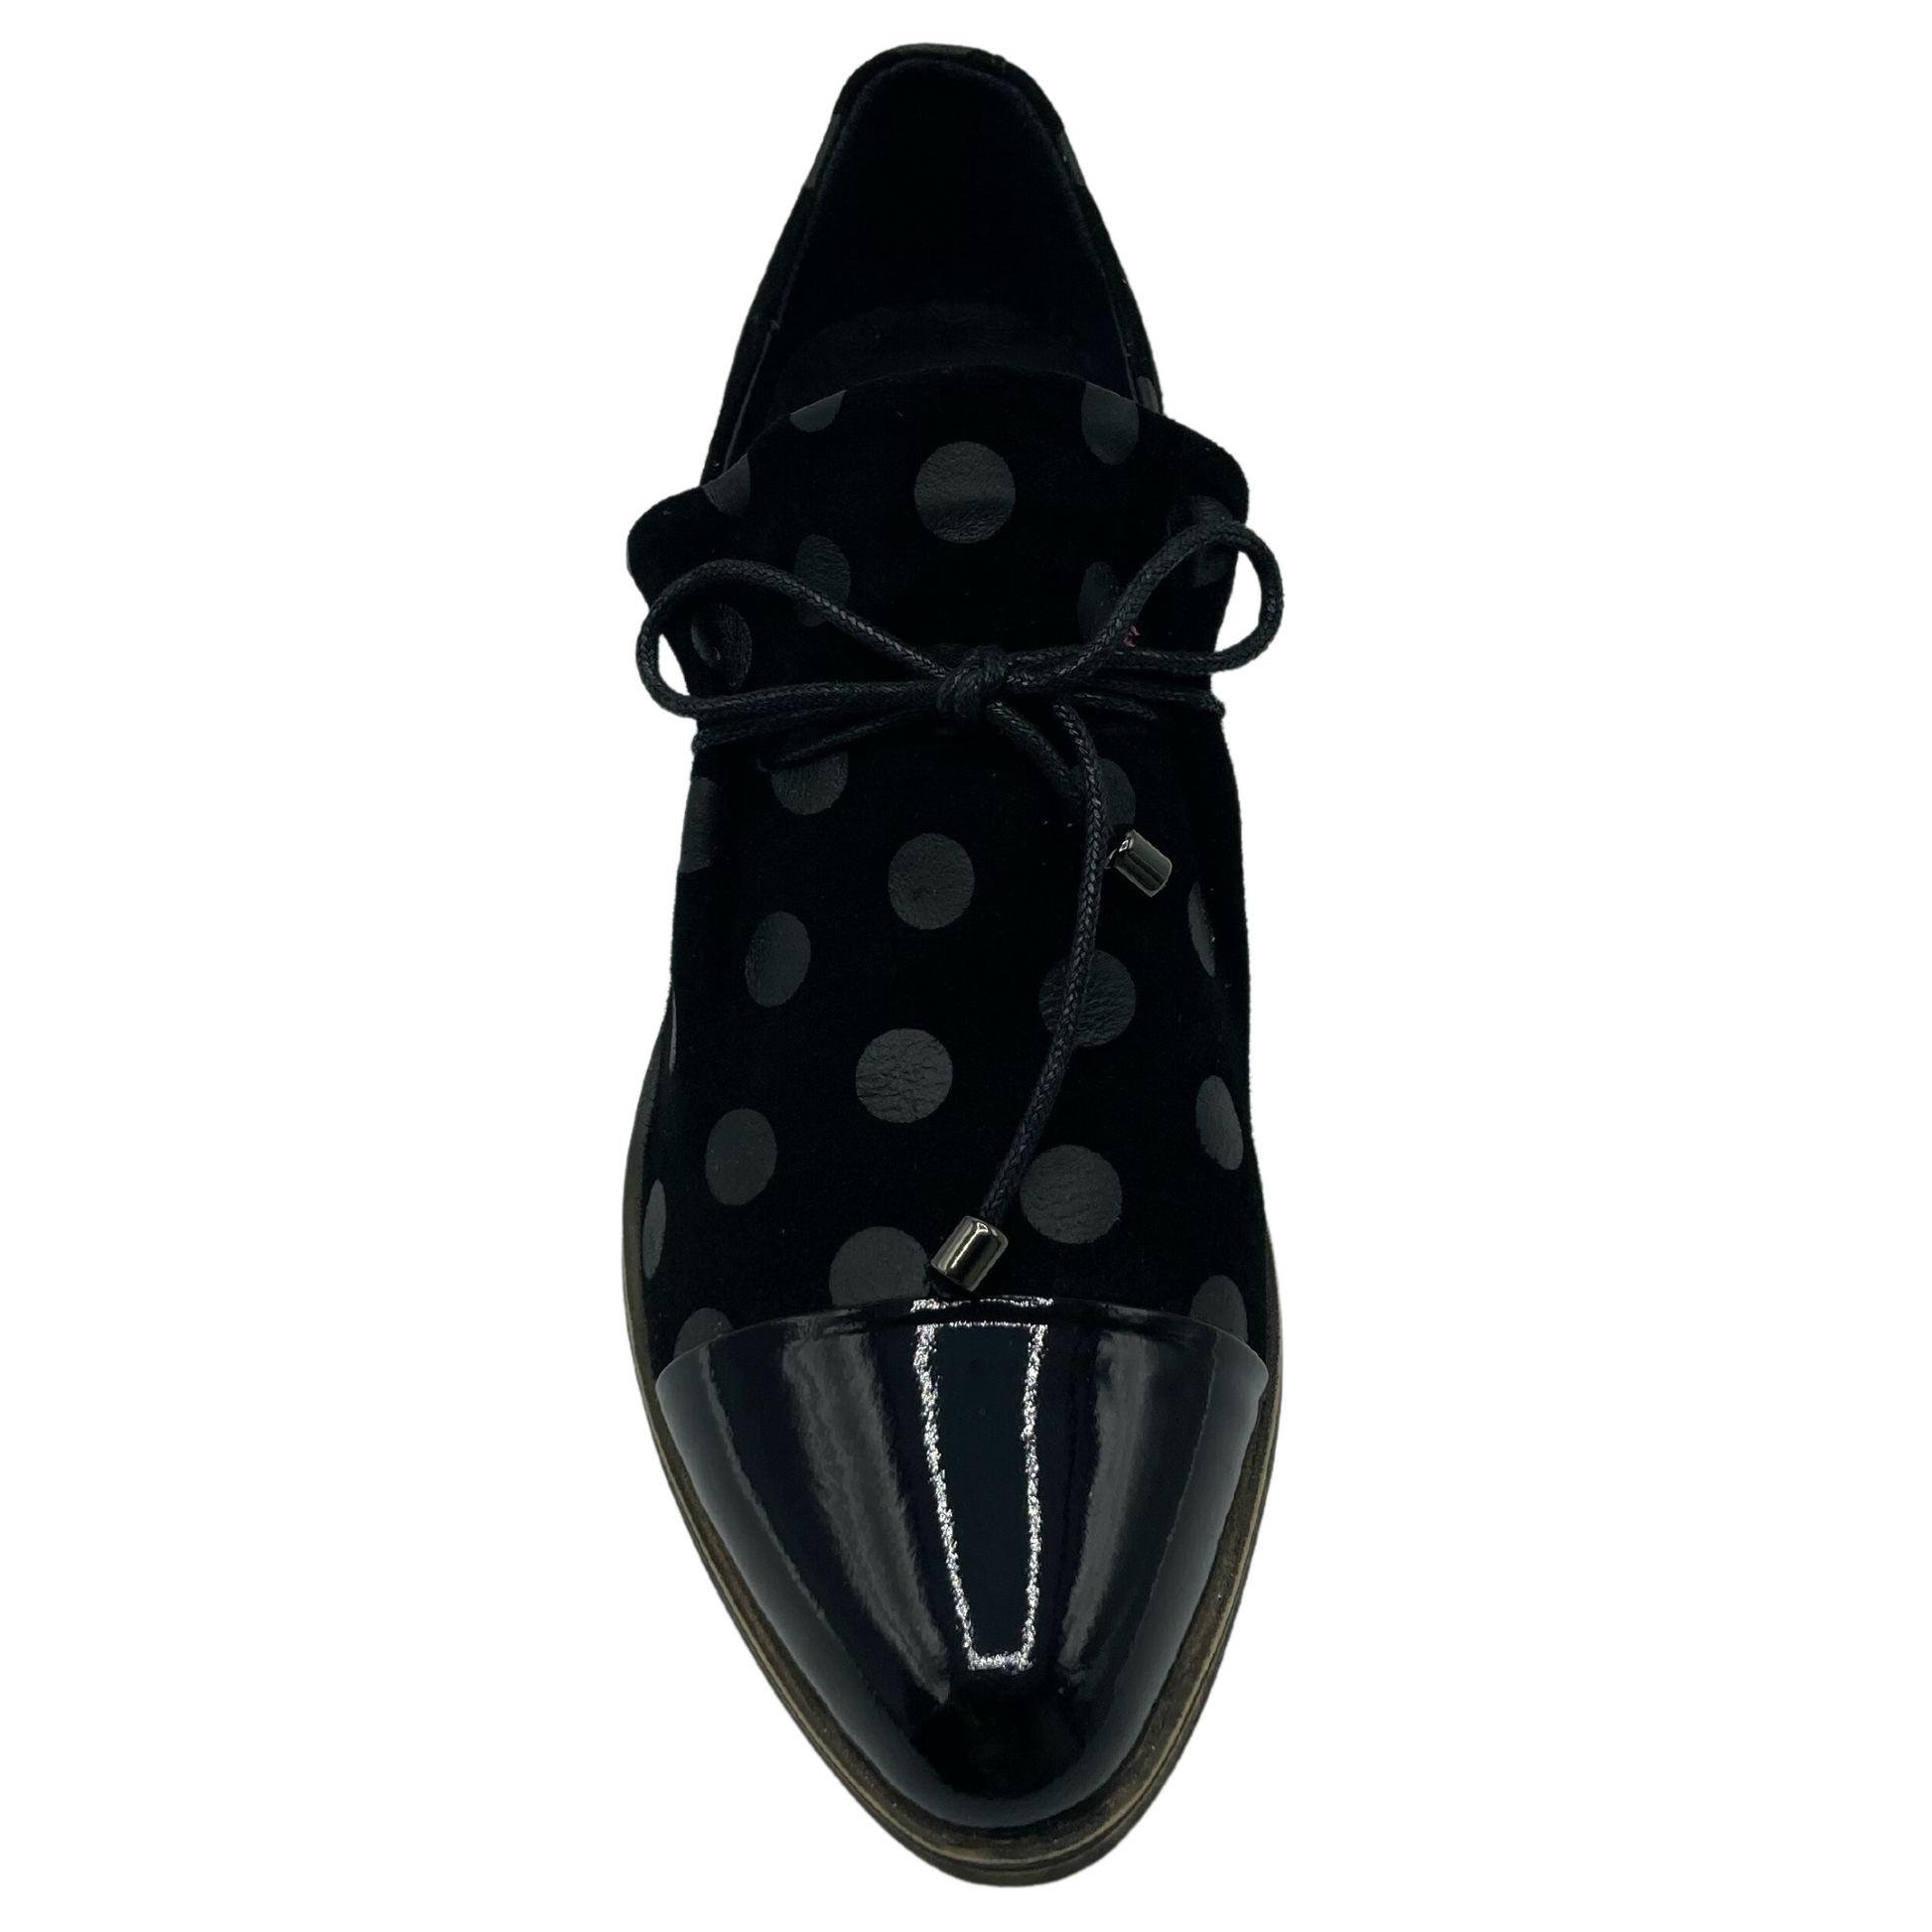 Top view of a leather shoe with patent toe cap and matching polka dot pattern on the upper